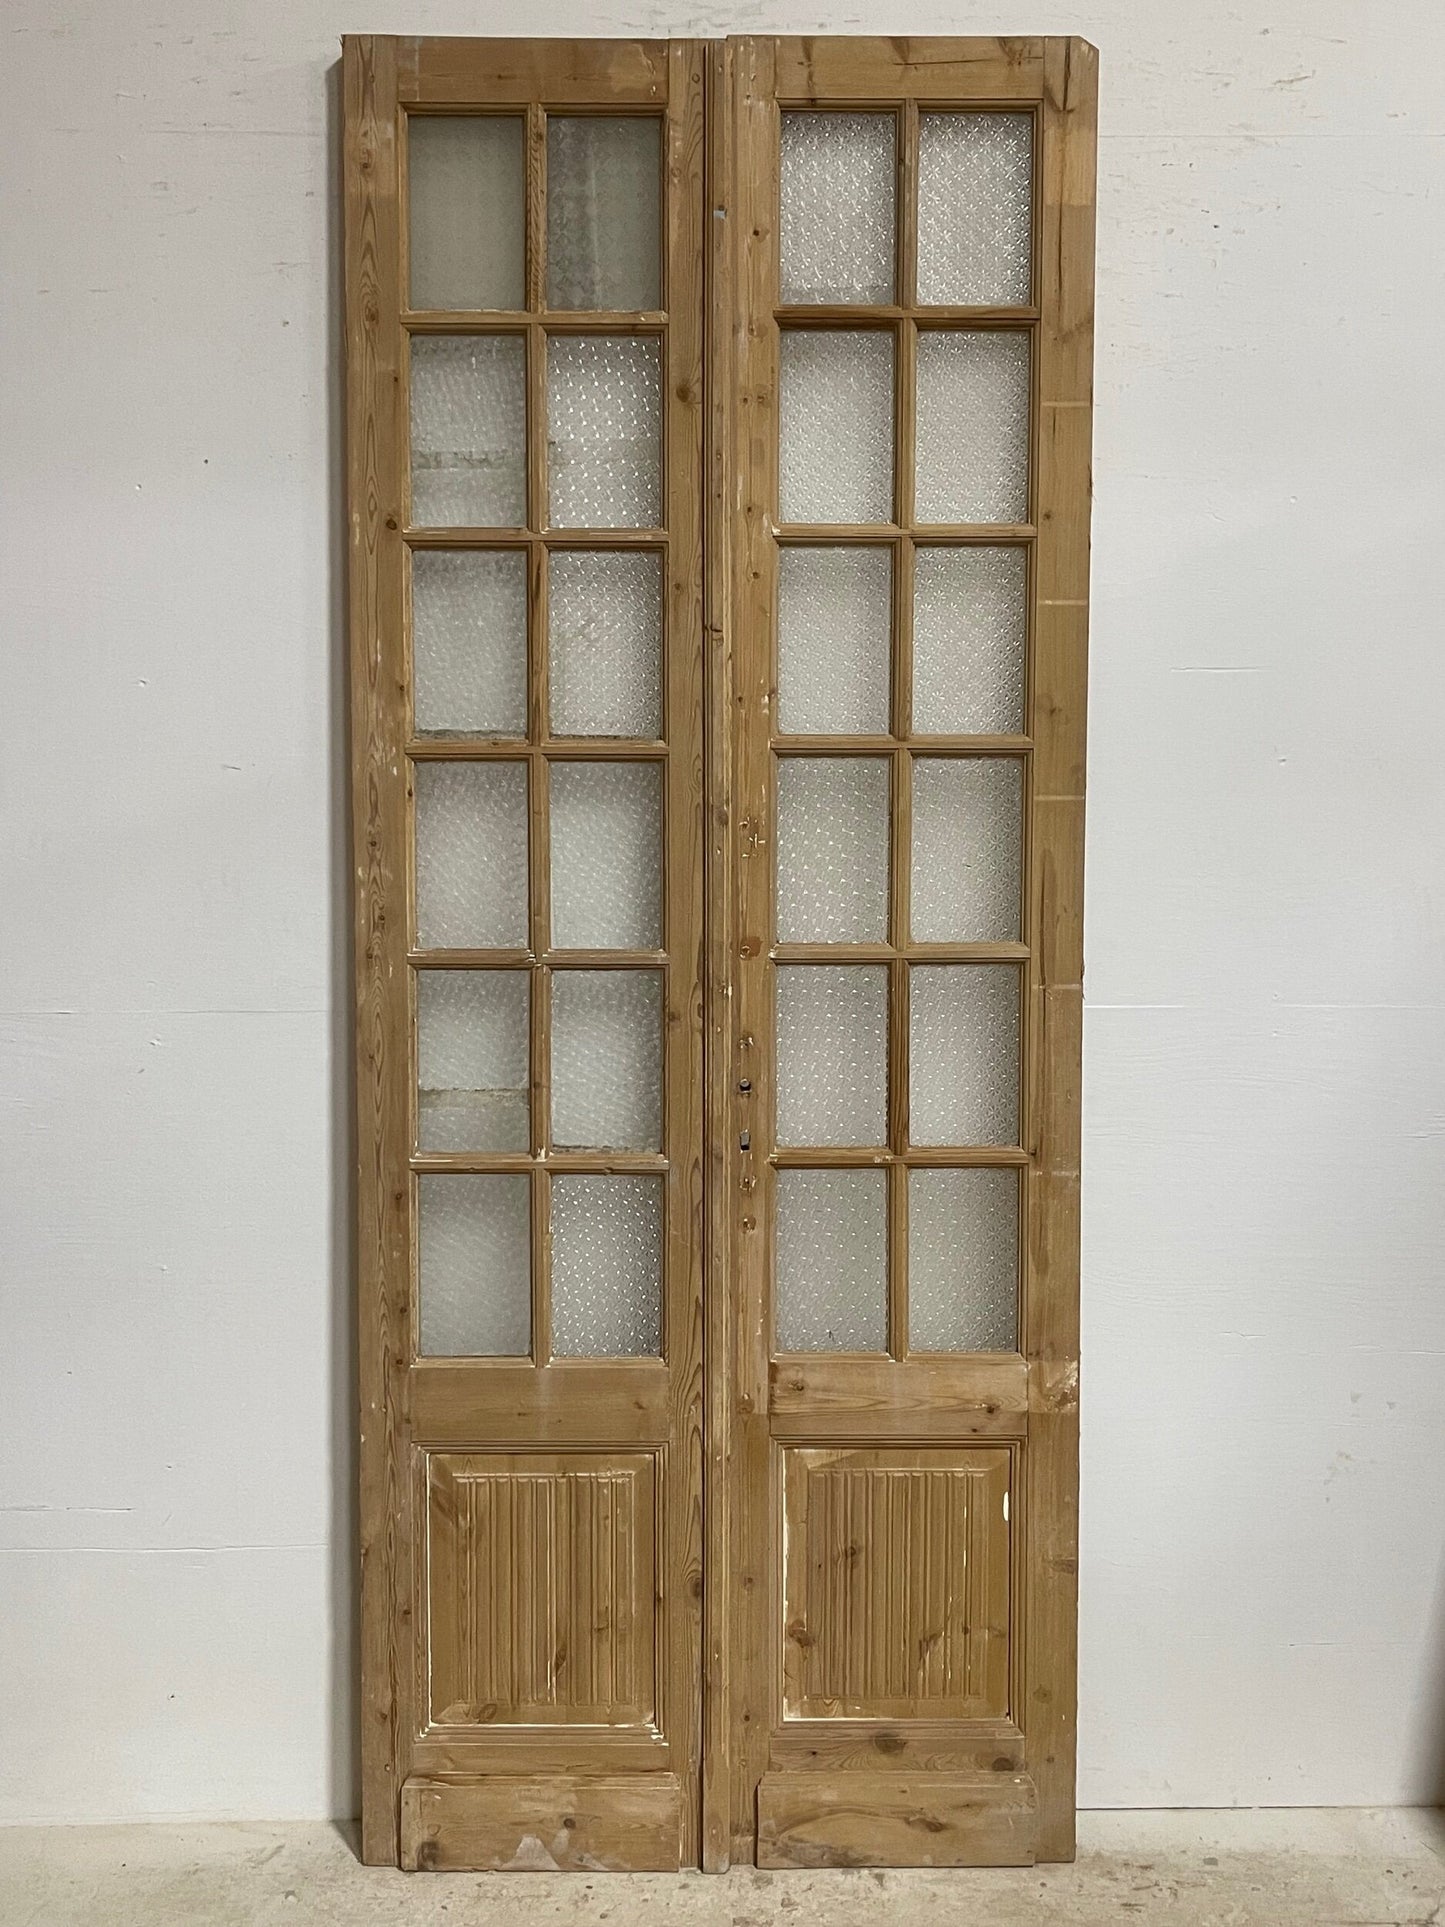 Antique French doors with glass  (100x40.5) H0225s